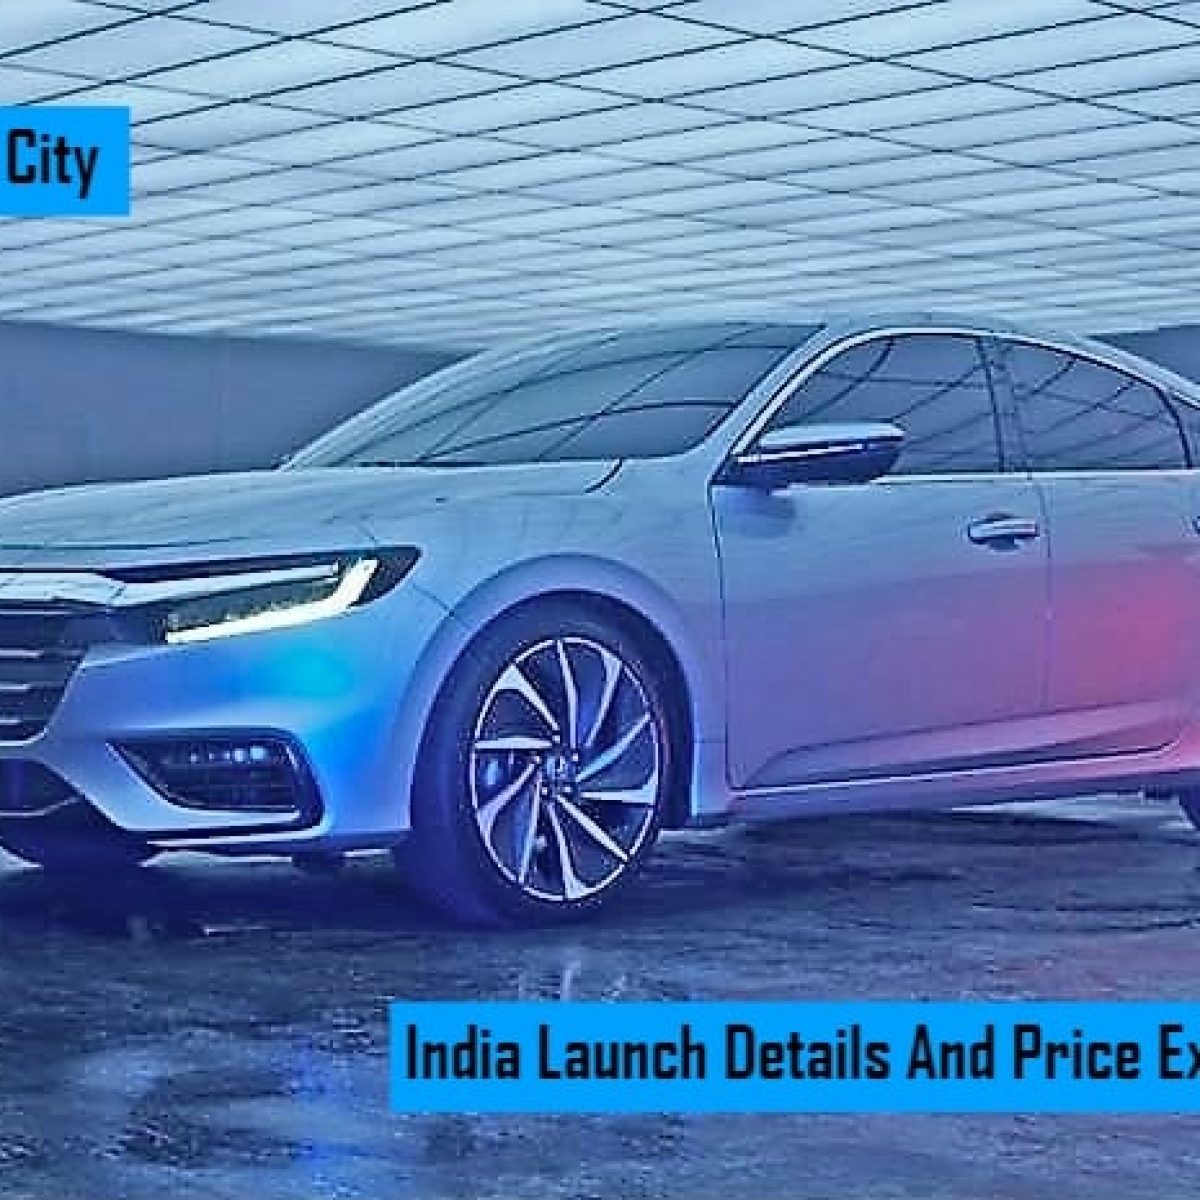 2019 Honda City India Launch Price Features Specs And